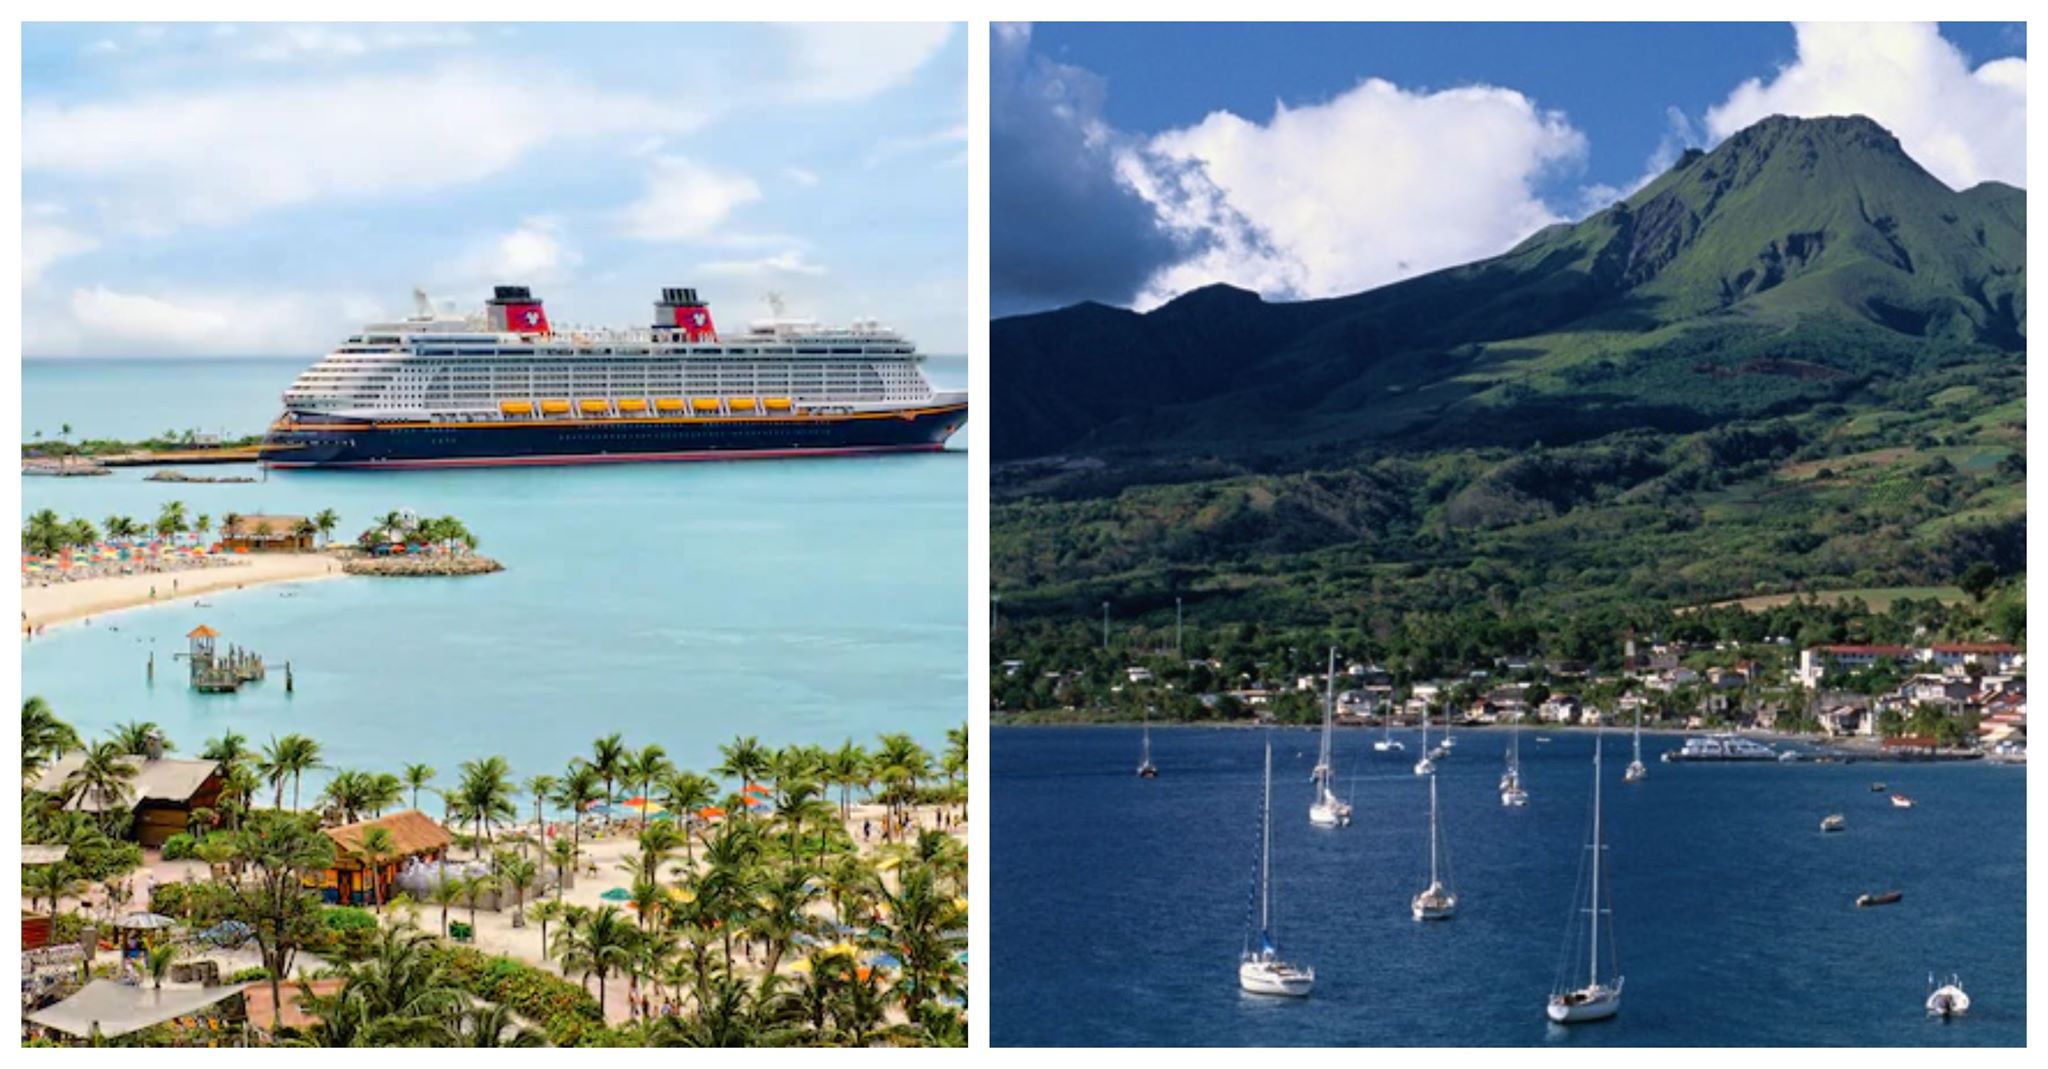 Disney Cruise Line Southern Caribbean Port to Require Passport